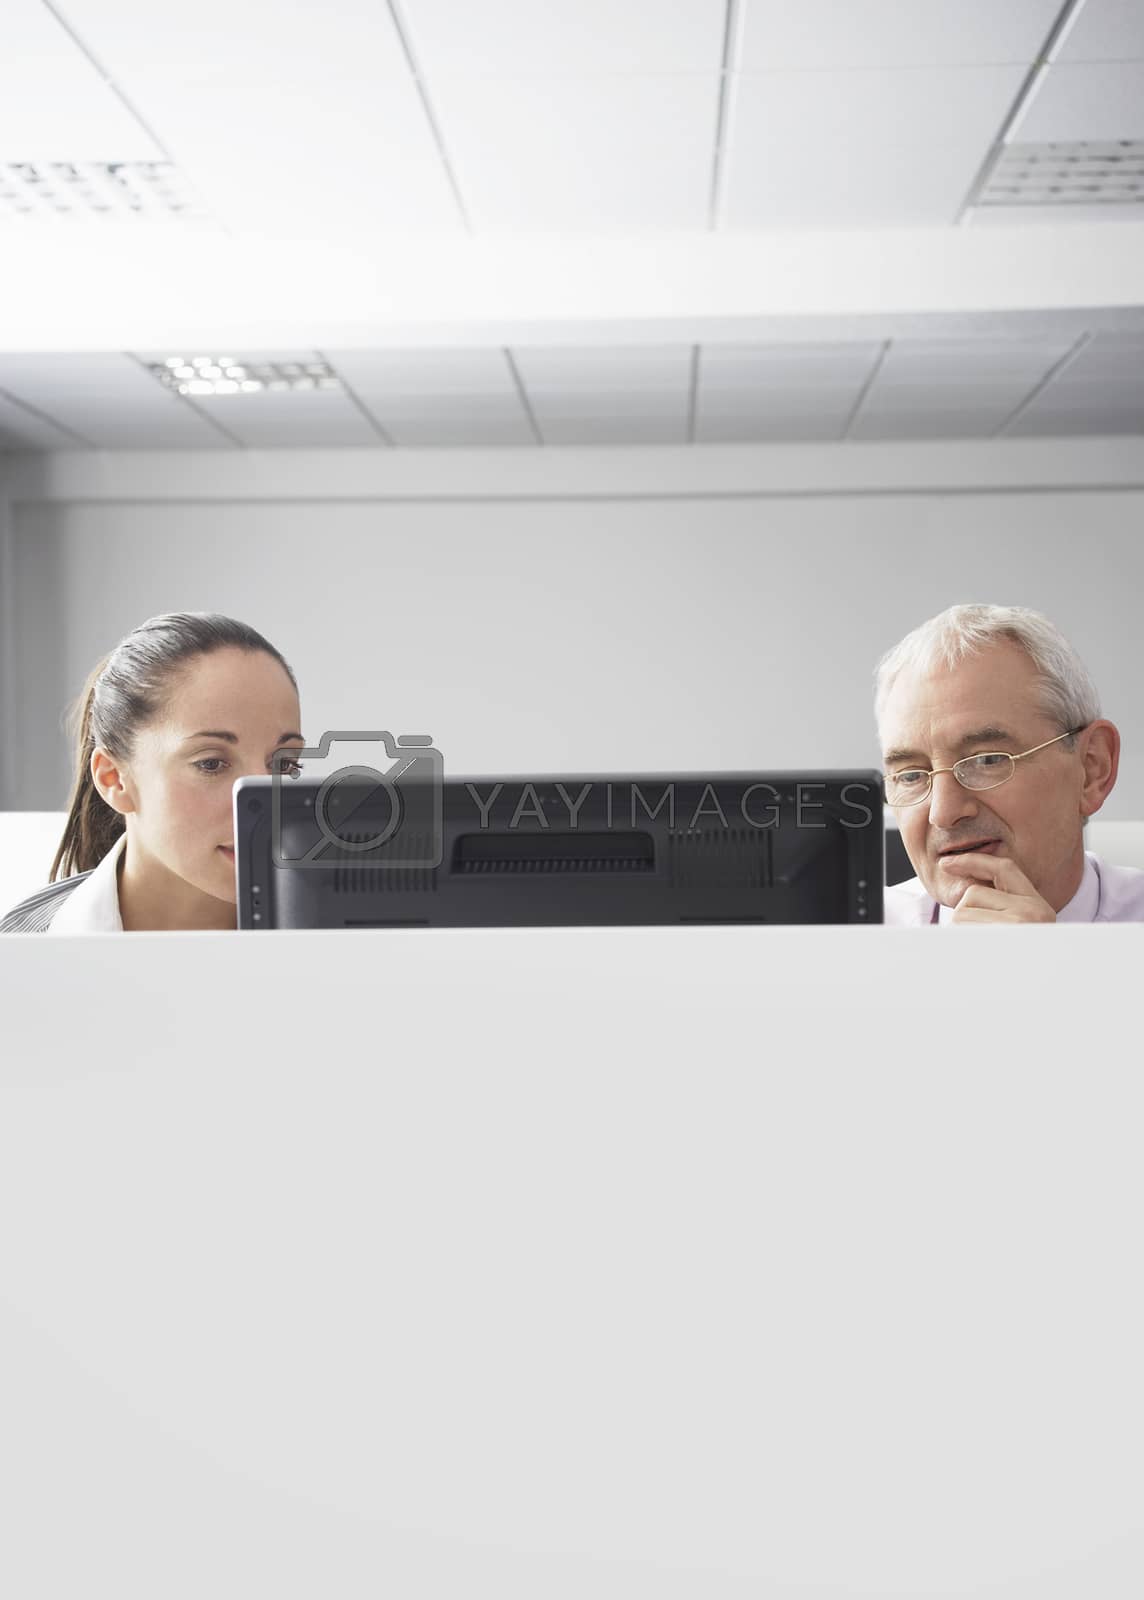 Royalty free image of Serious businesswoman and businessman looking at computer in cubicle by moodboard